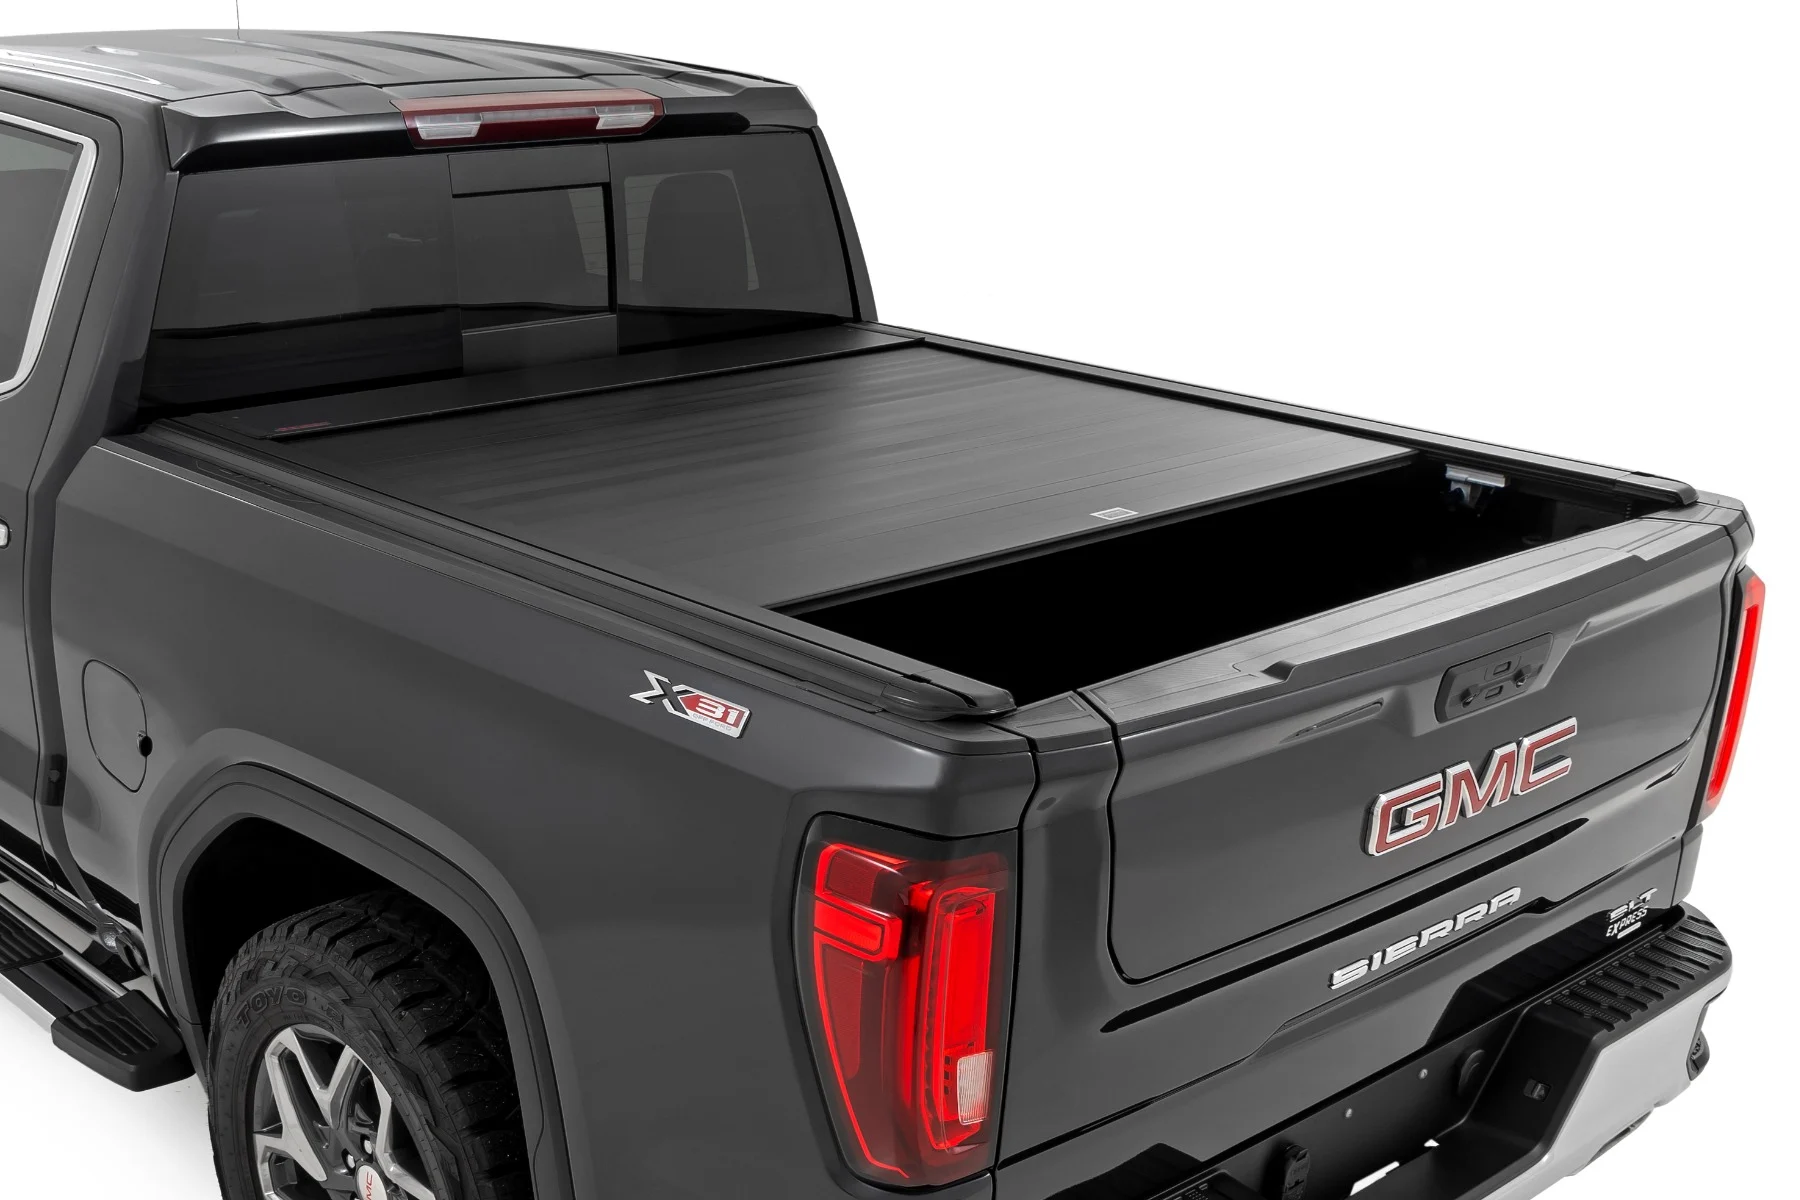 Retractable Bed Covers for GMC trucks 